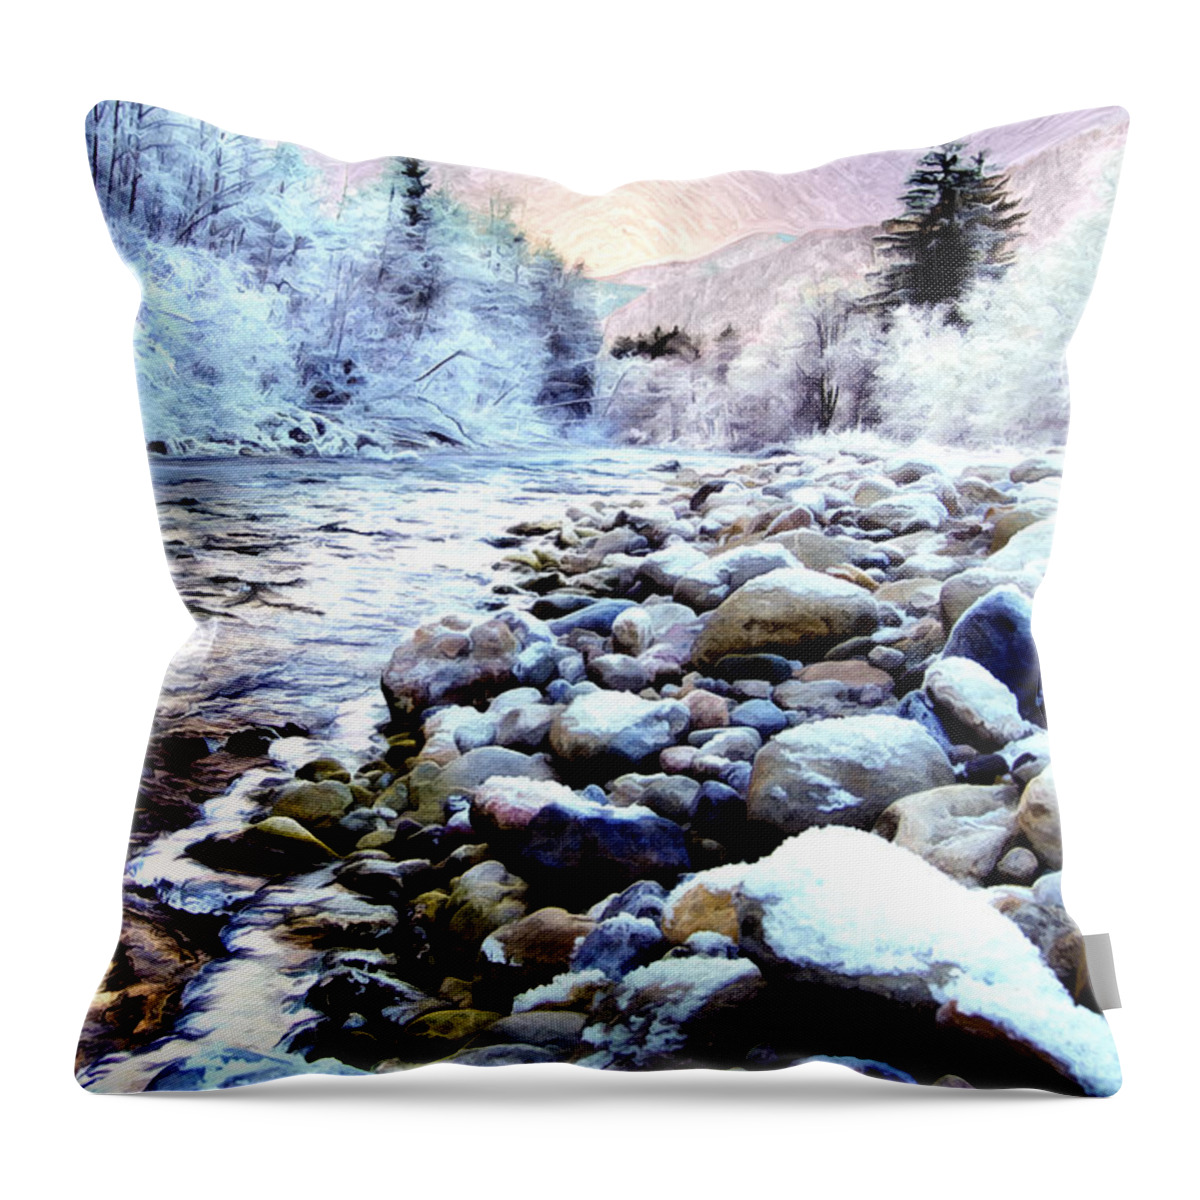 Winter Throw Pillow featuring the photograph Winter River by Sabine Jacobs